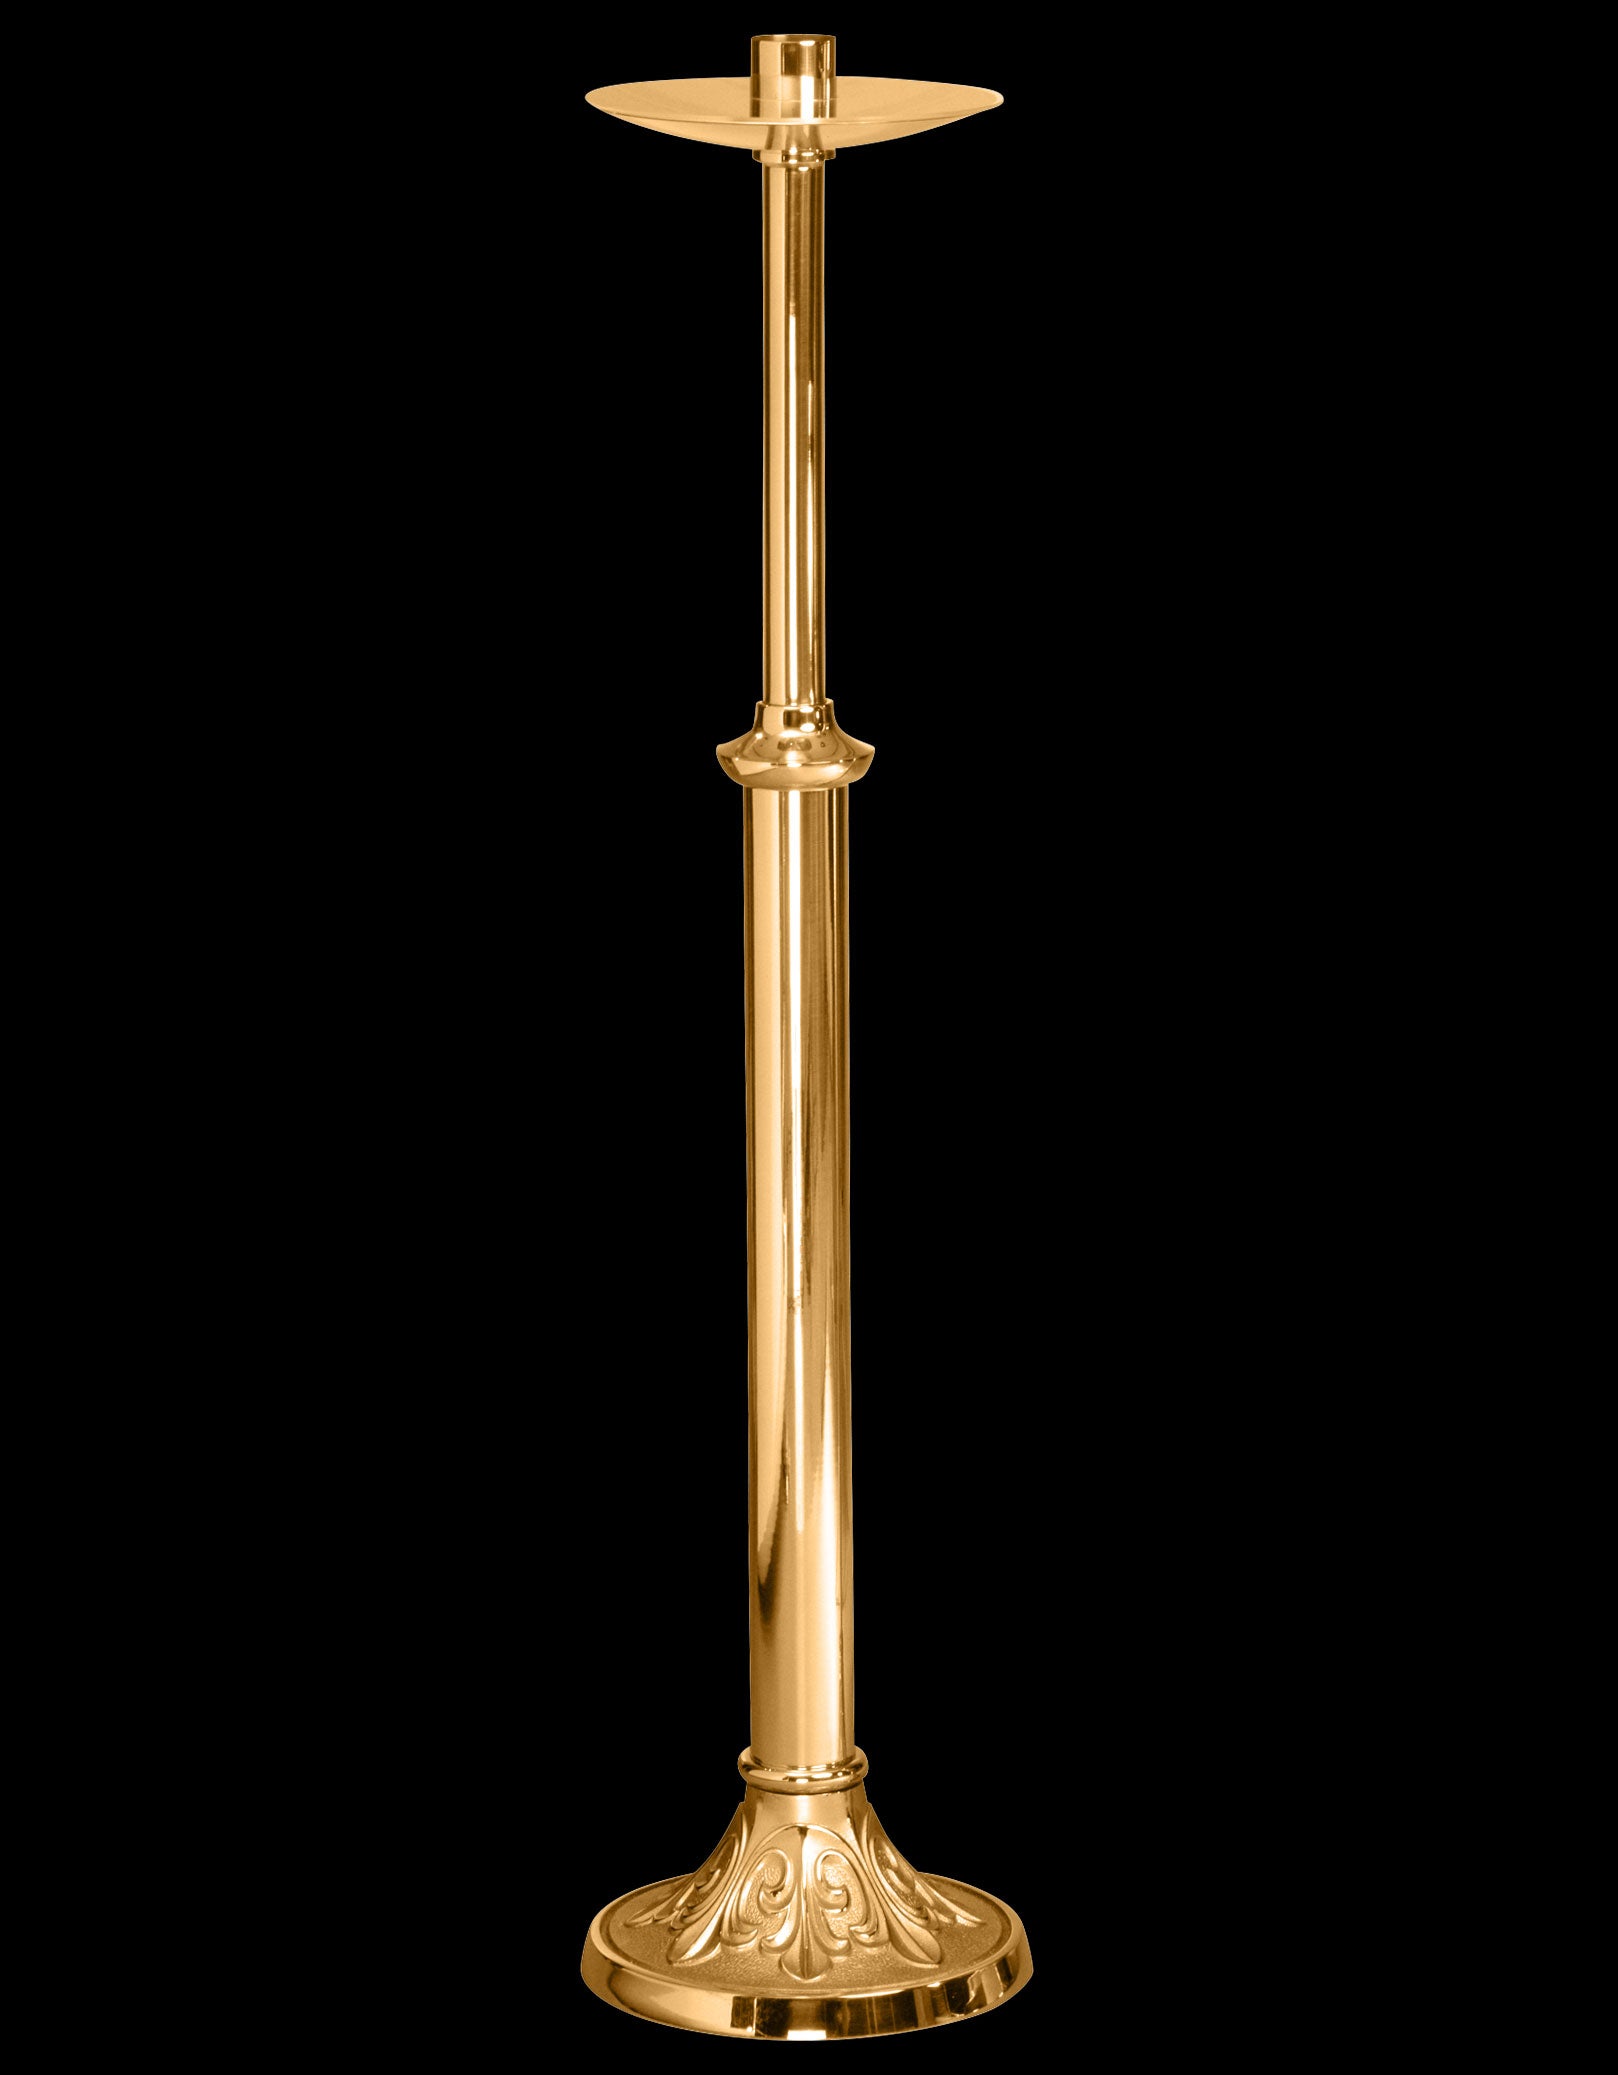 processional-torch-candlestick-232-206.jpg